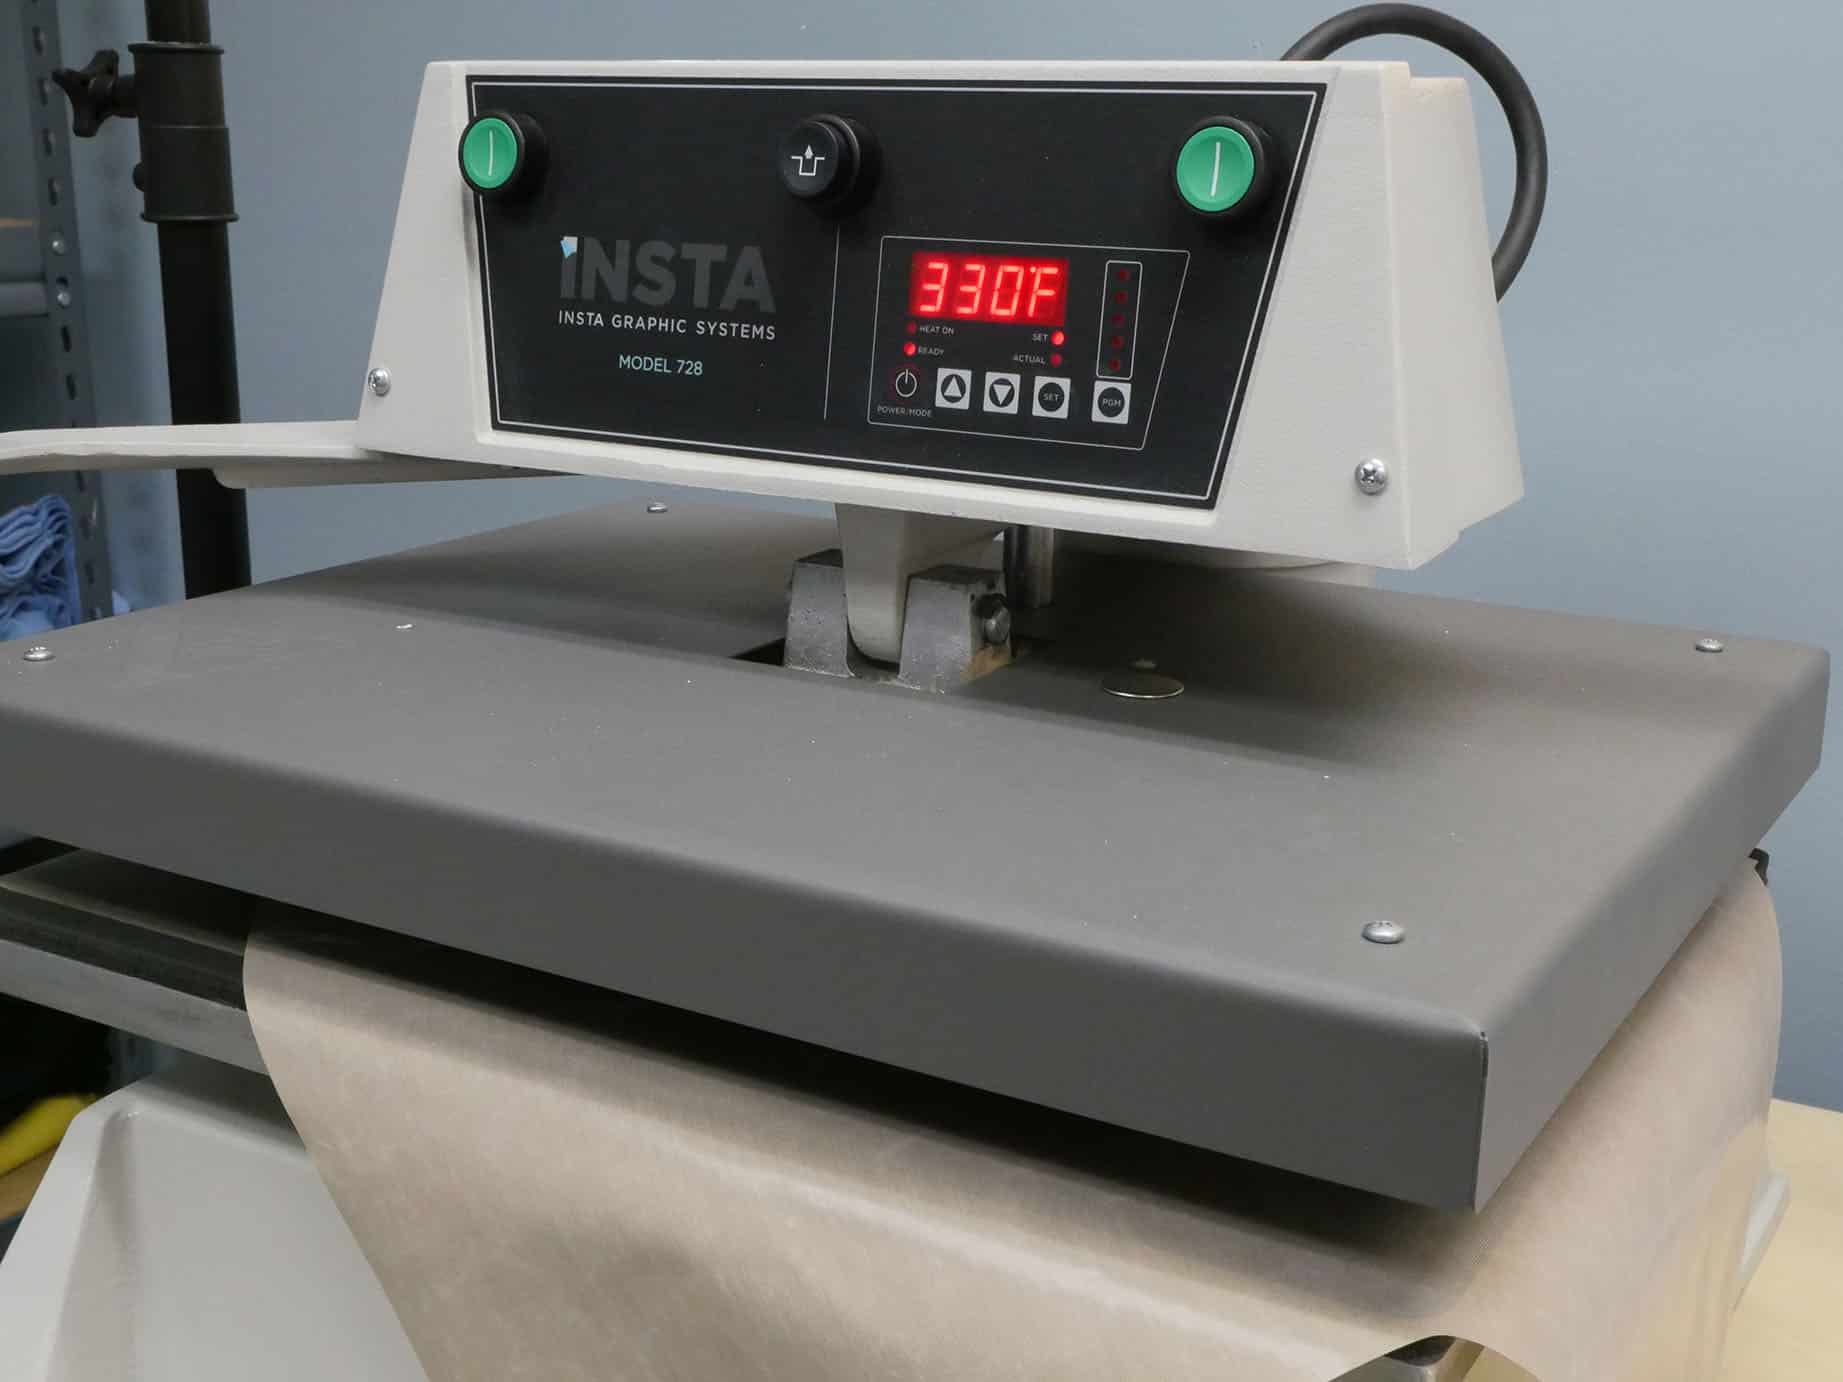 The heat press up to proper temperature for ThermoFlex Plus which is 330 degrees